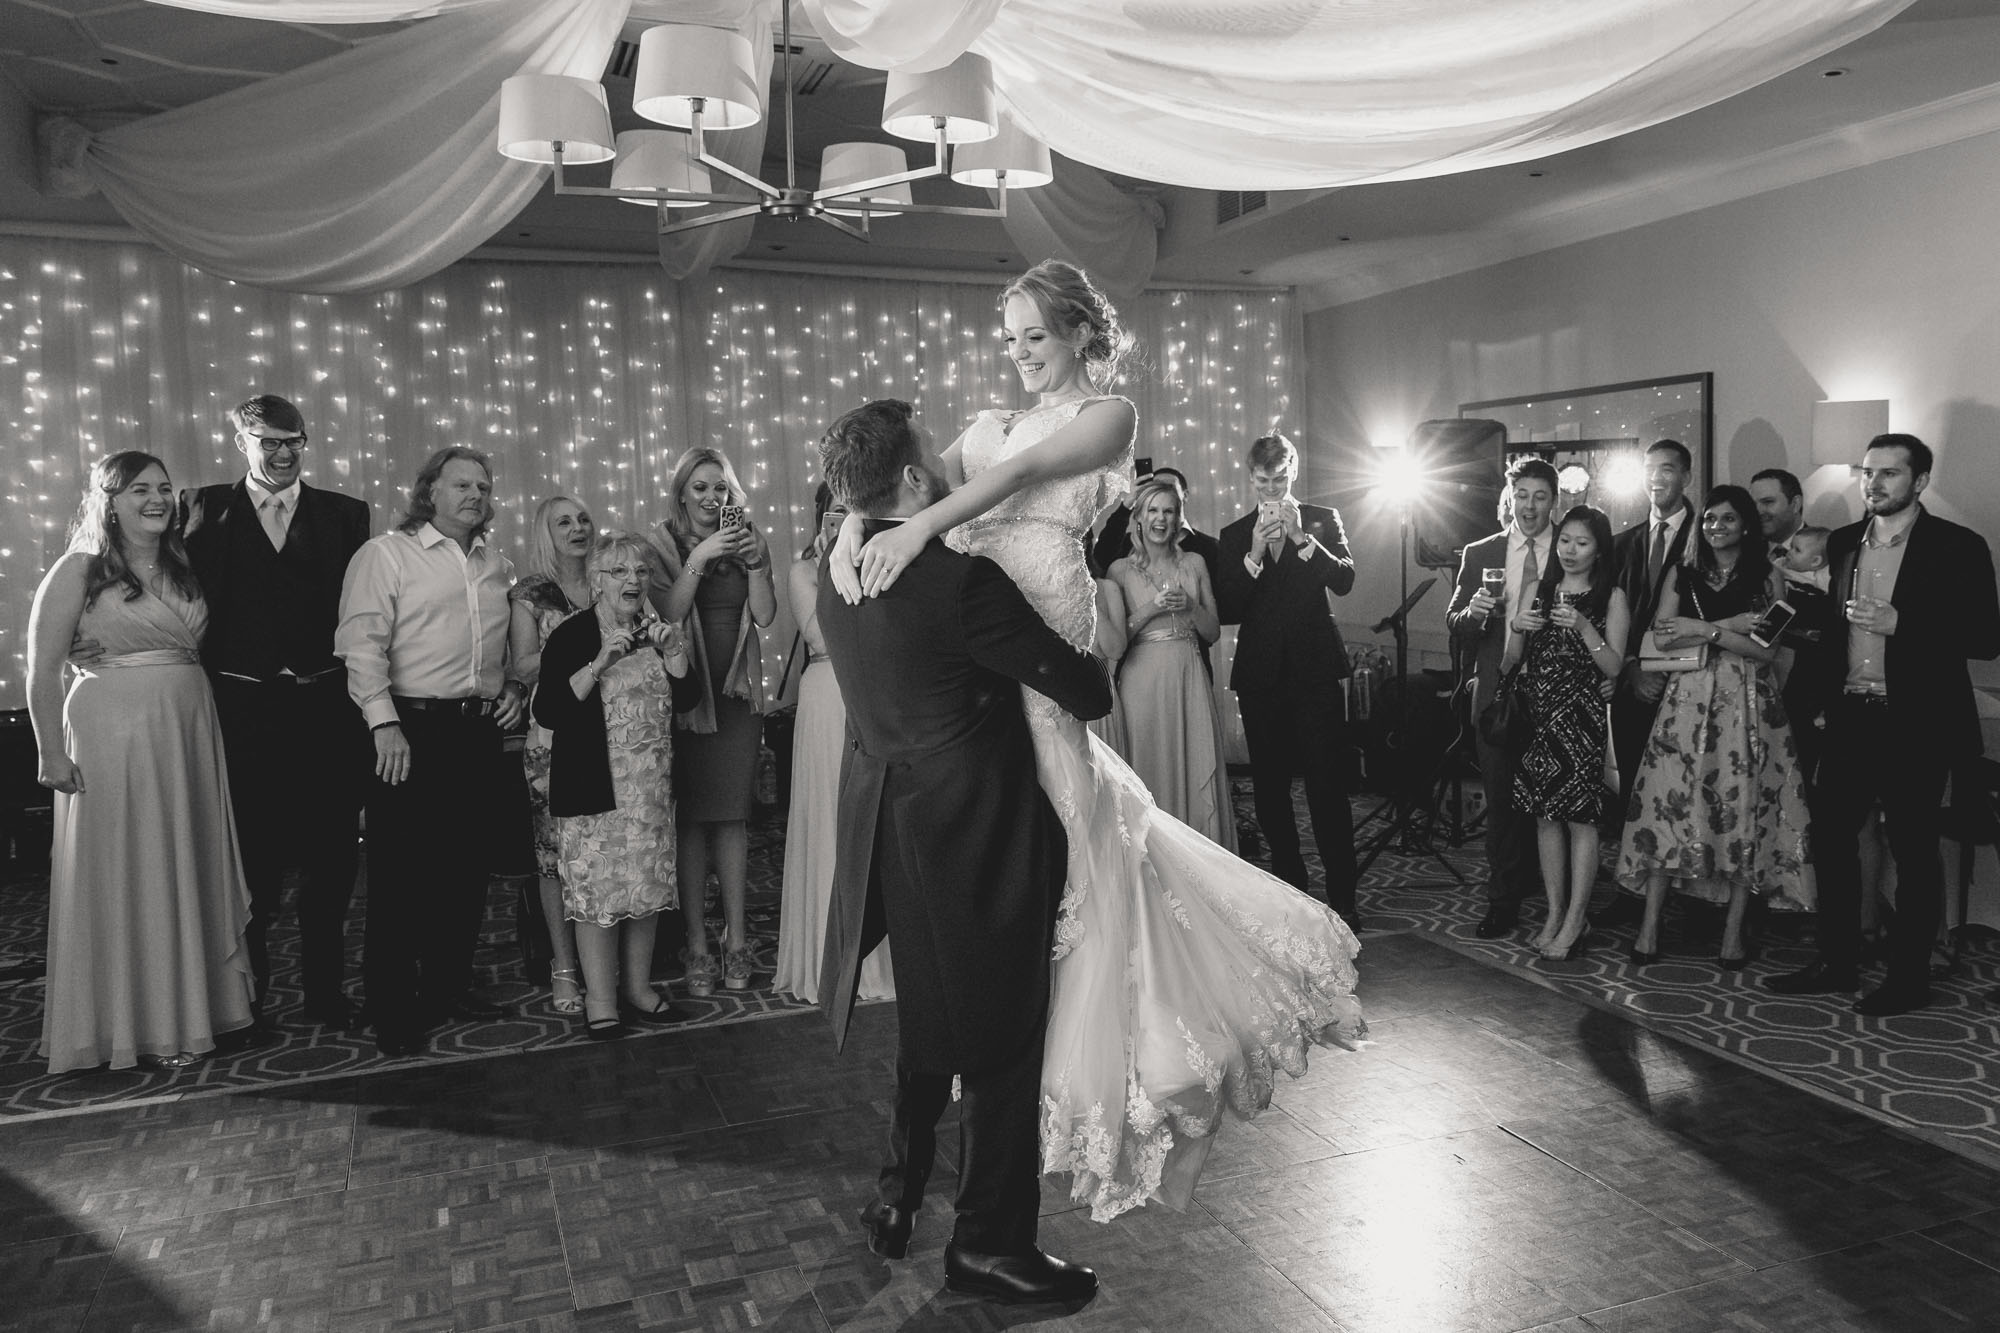 Bride and groom have their first dance together on their wedding day at Wotton House.